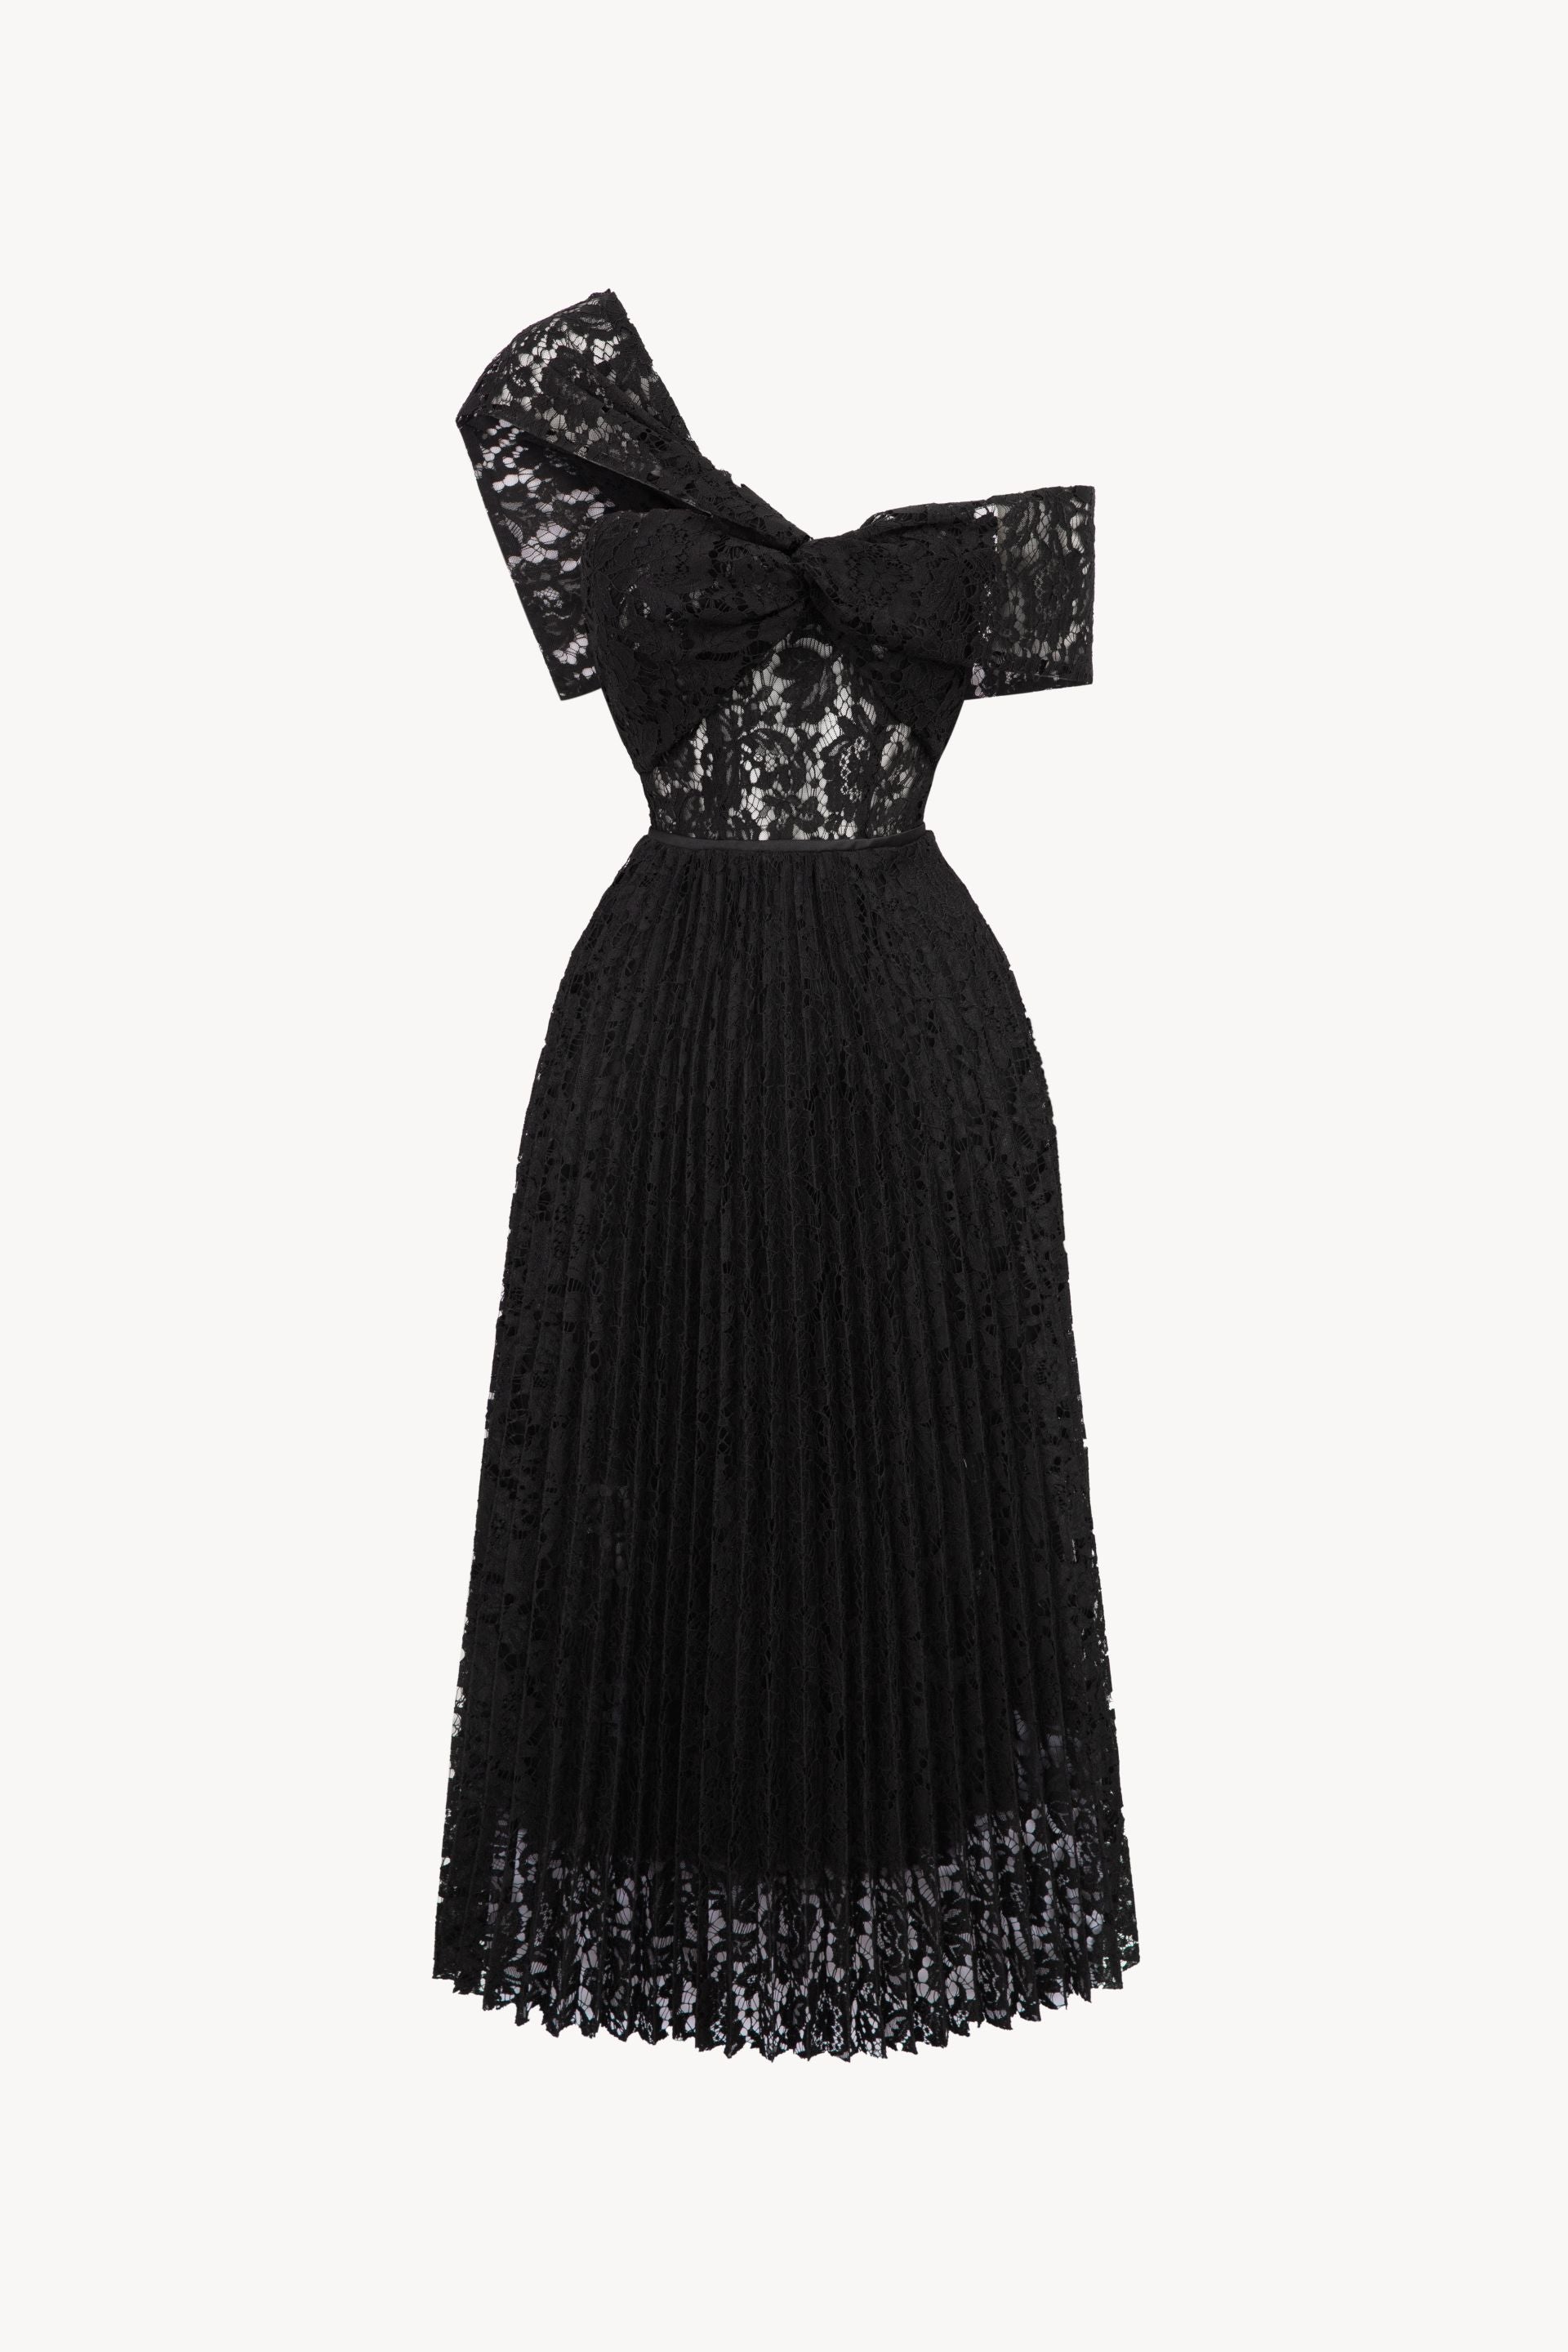 EDITH Lace Midi Dress – GIANA official website